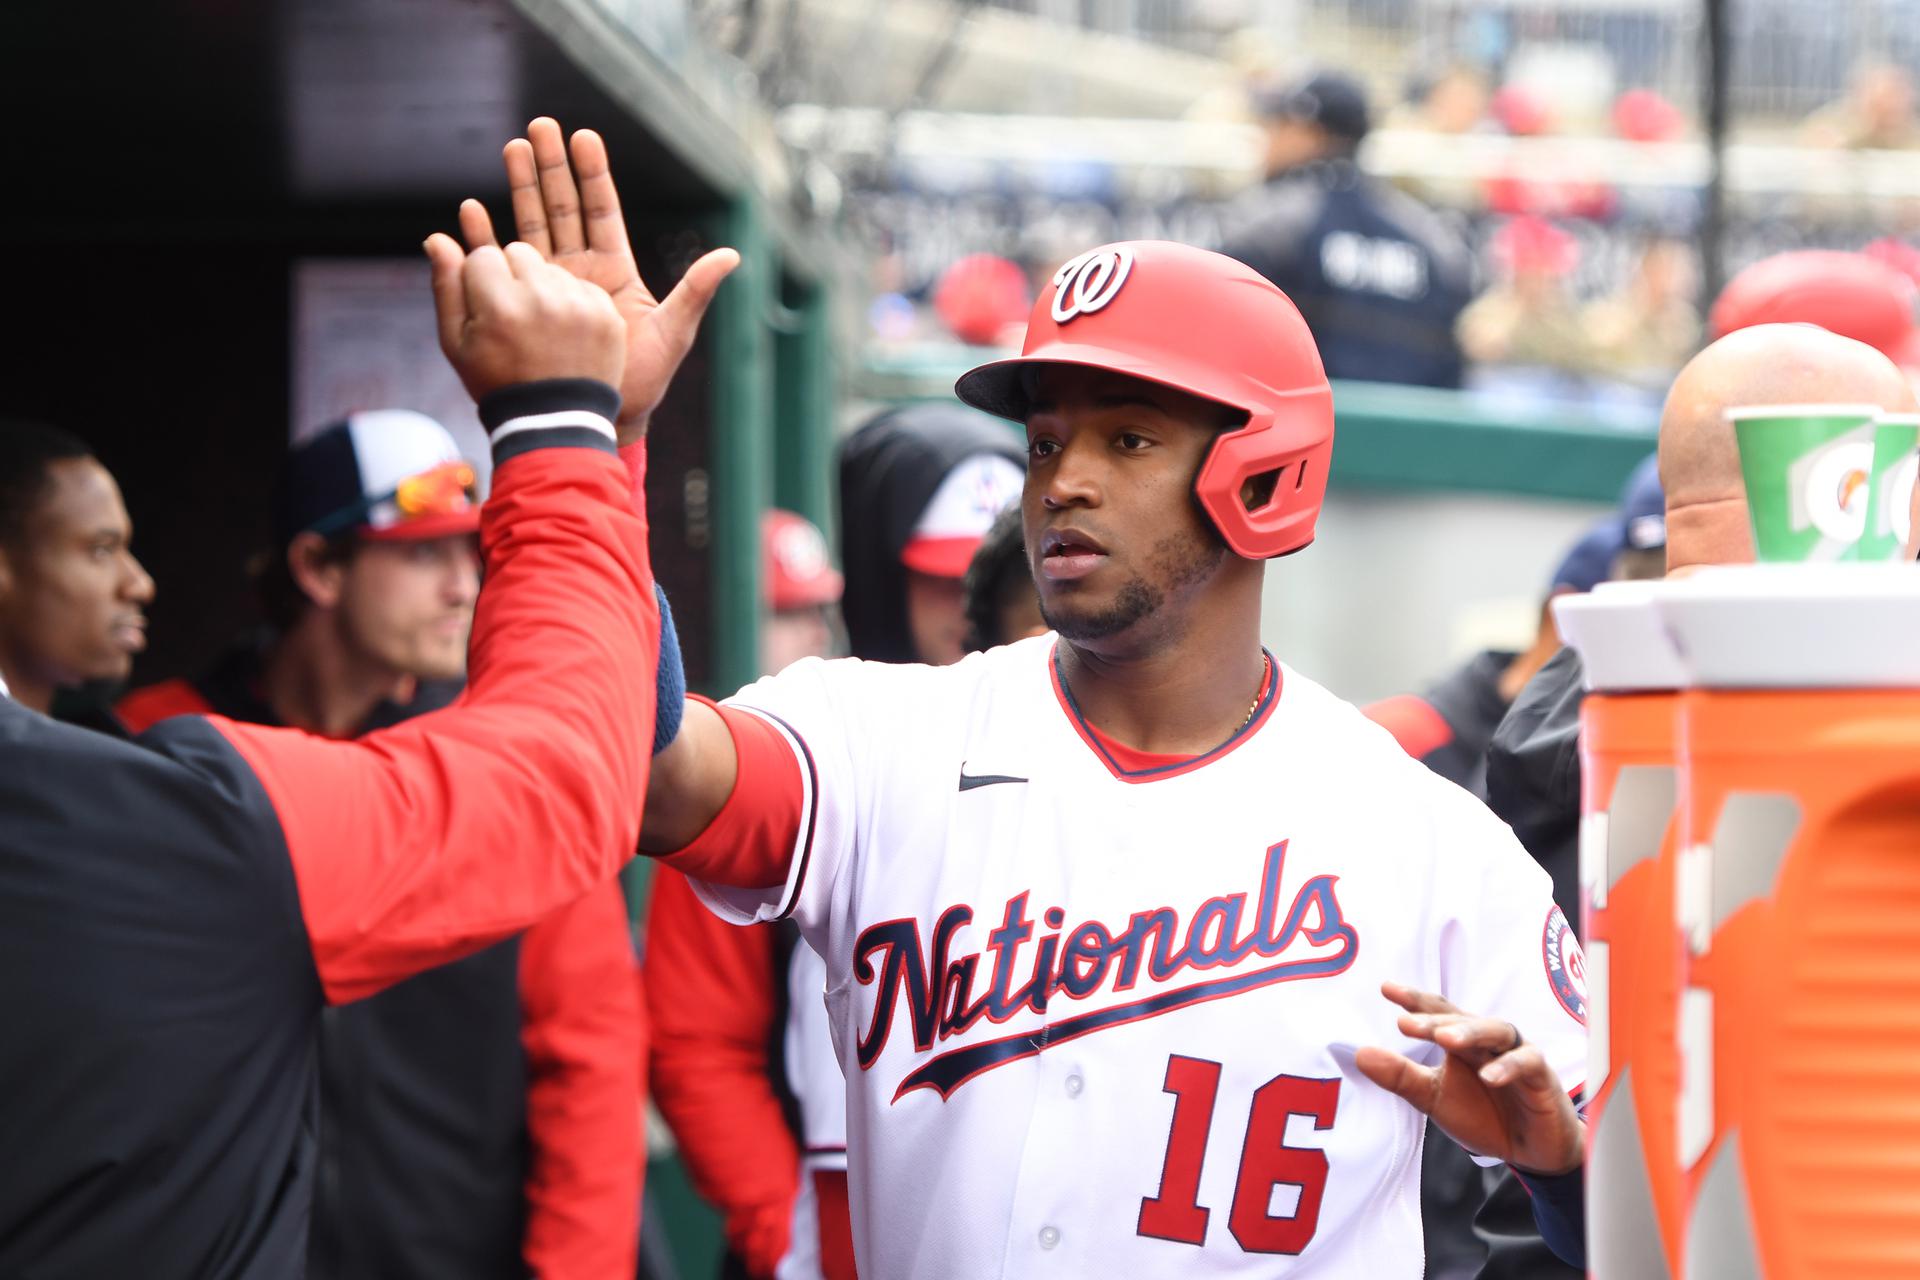 Victor Robles celebrates scoring a run in the fifth inning during game one of a doubleheader baseball game against the Arizona Diamondbacks at the Nationals Park